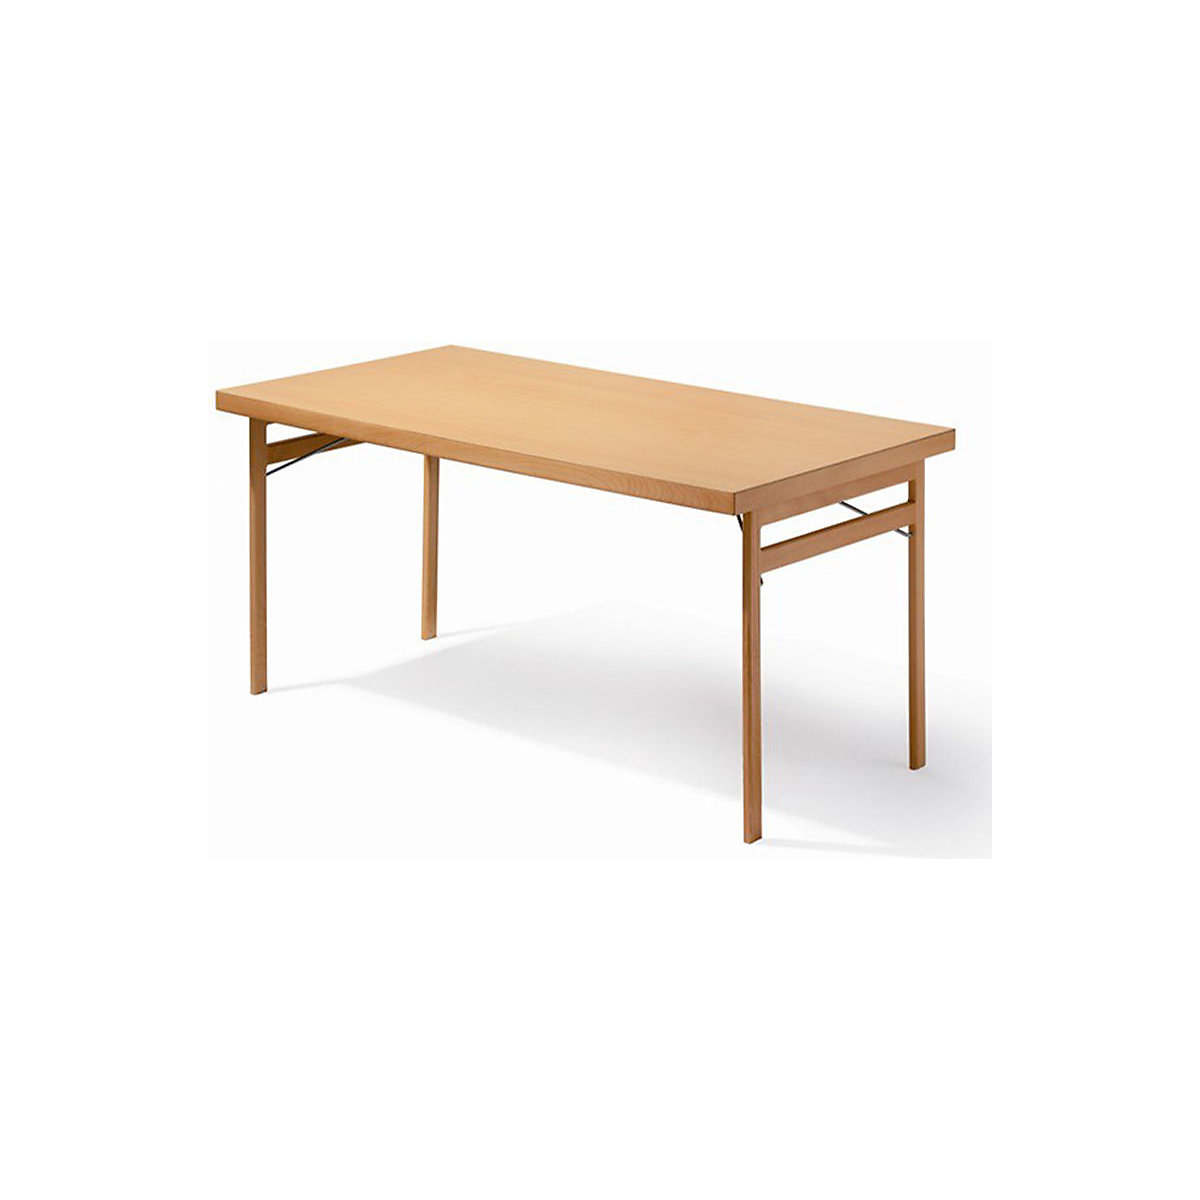 Folding table, solid wood frame, beech, WxD 1200 x 800 mm, laminate tabletop-2